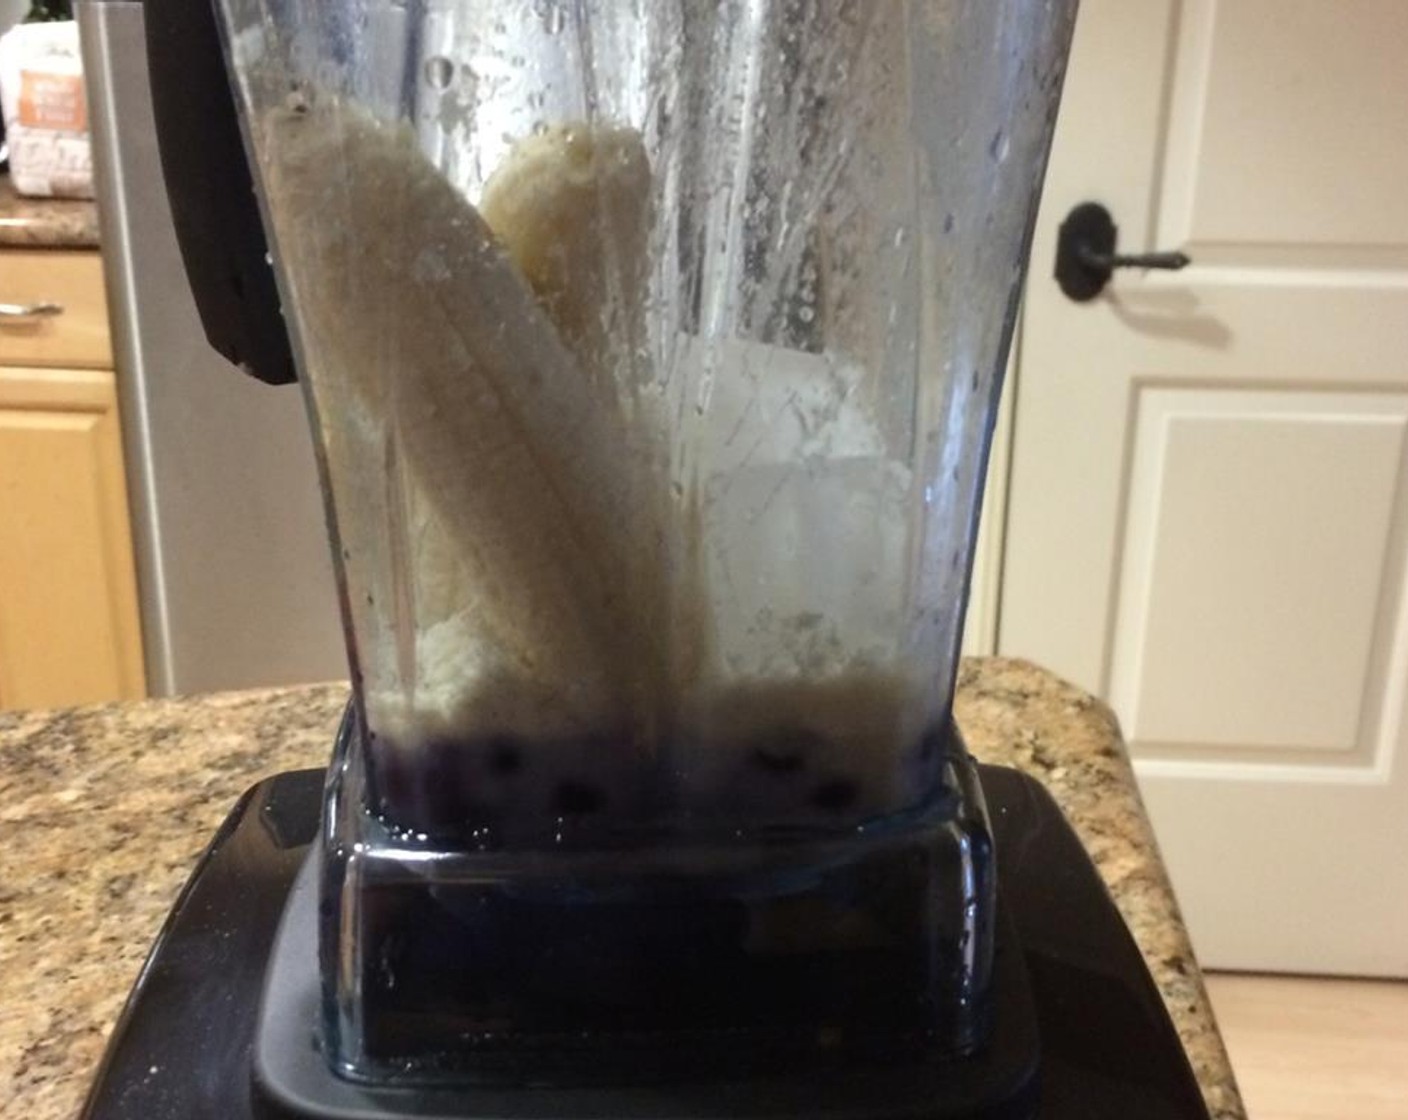 step 1 In this order, add Ice (to taste), Frozen Blueberries (1 cup), Banana (1), 2 servings of Plant-Based Vanilla Protein Powder (to taste), and Soy Milk (1 cup) into the blender.